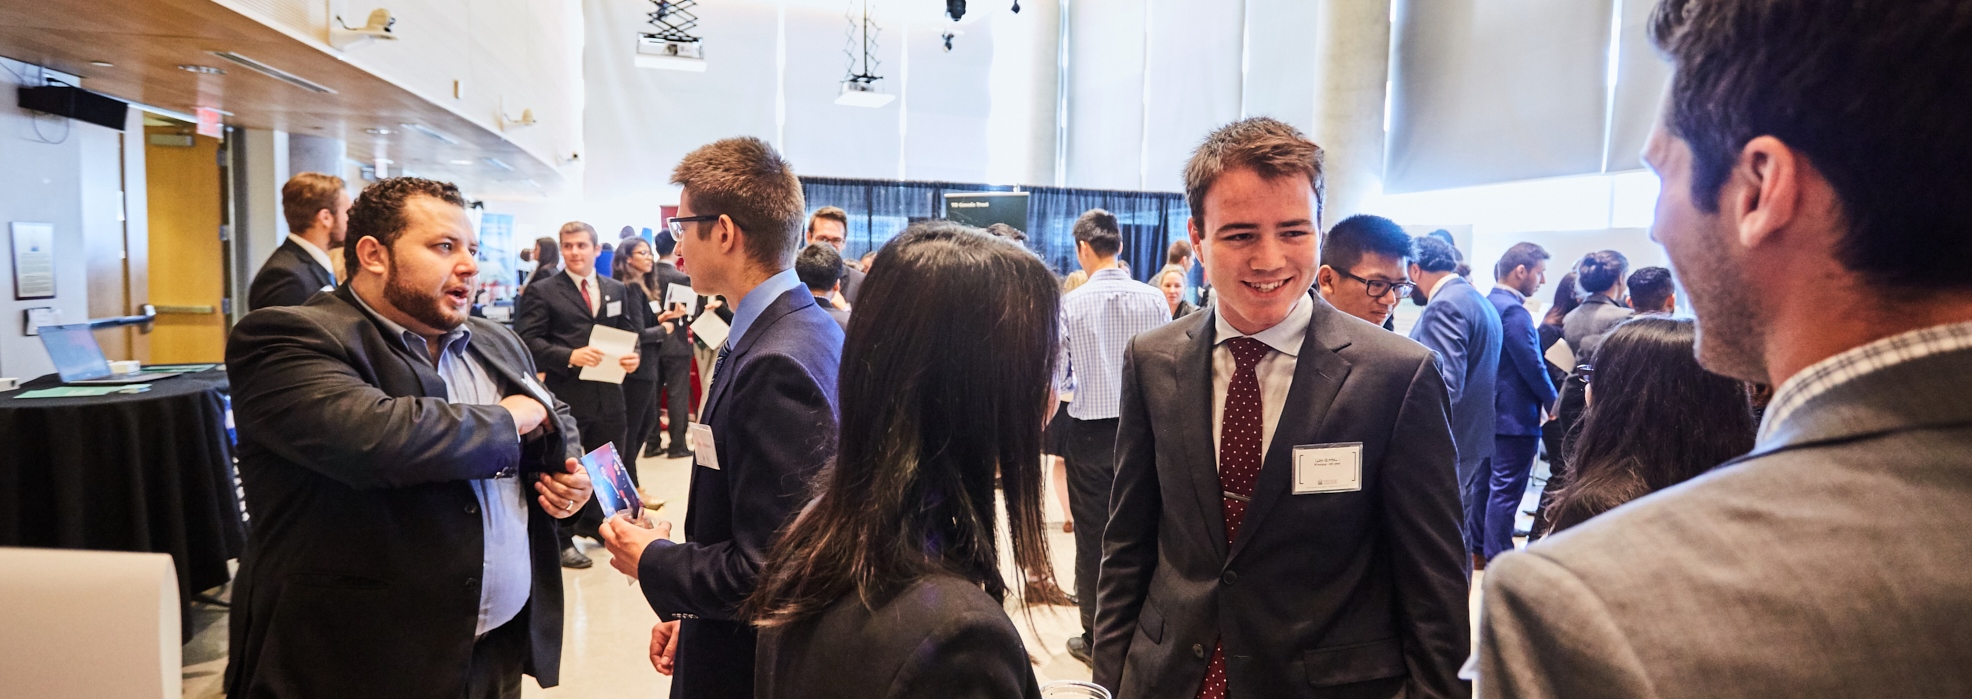 Annual Networking Events Telfer School of Management